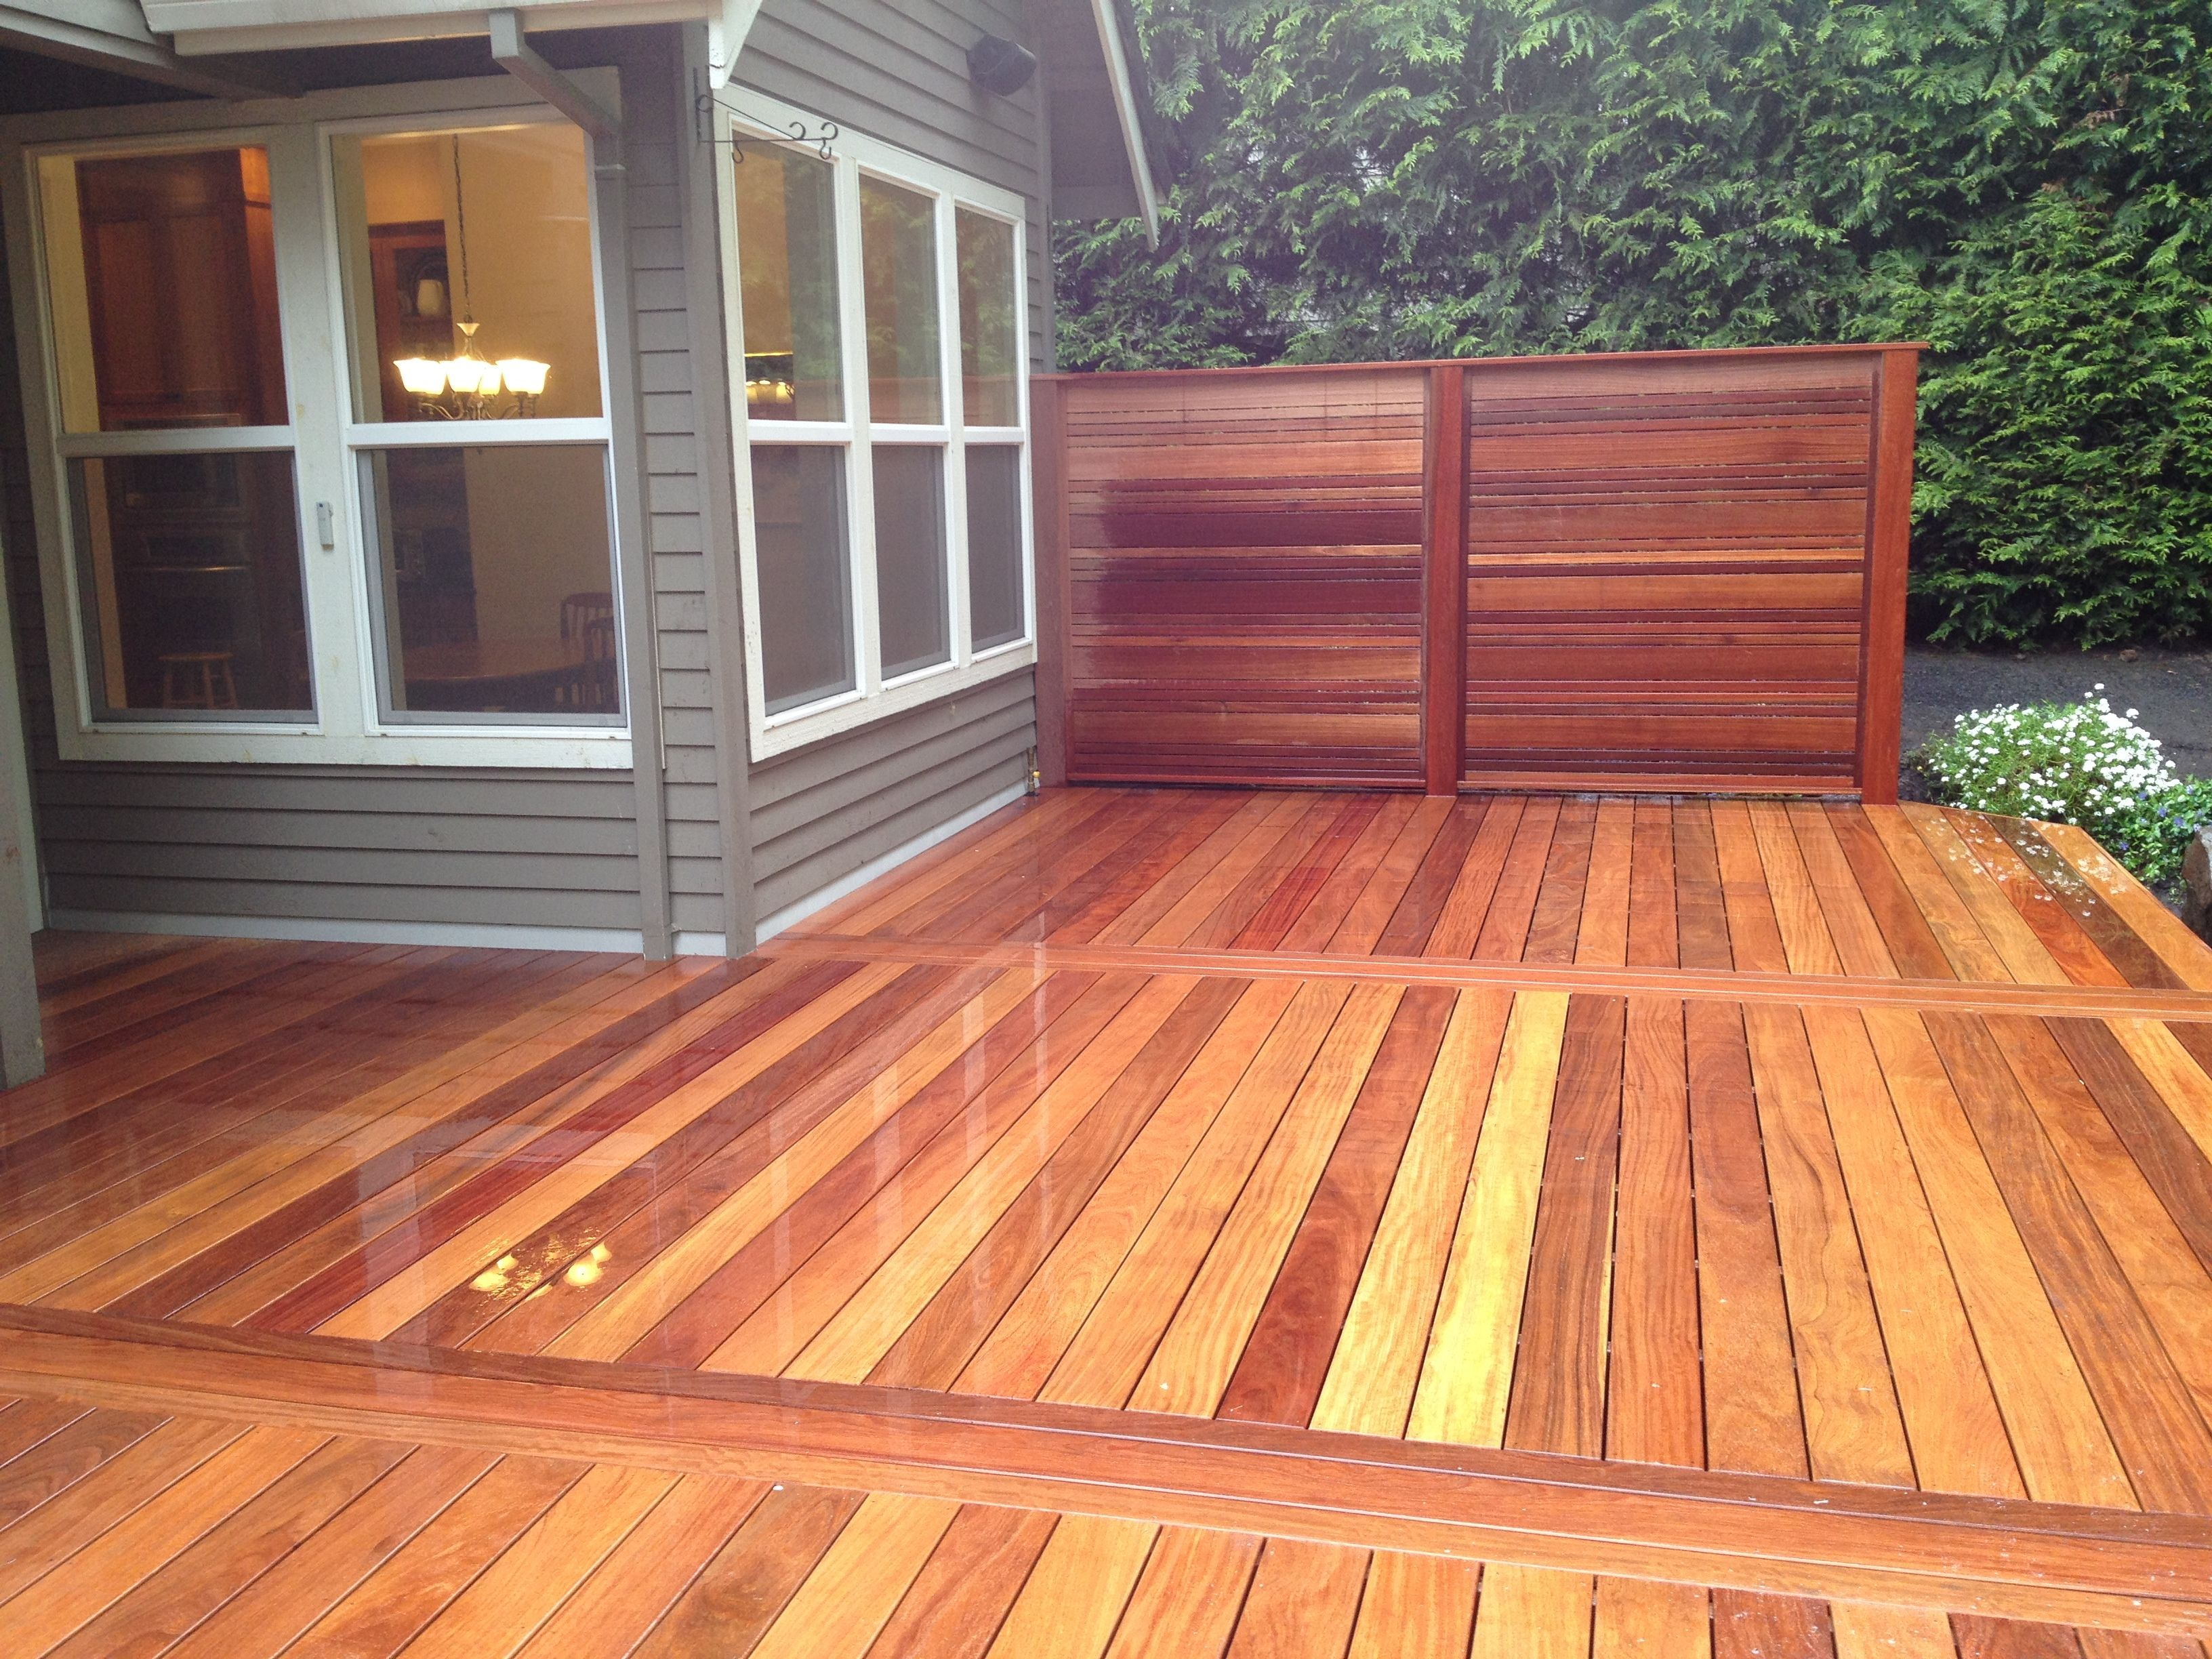 Brazilian Teak Wood Decking An Outdoor Deck Is Now An Increasingly within measurements 3264 X 2448